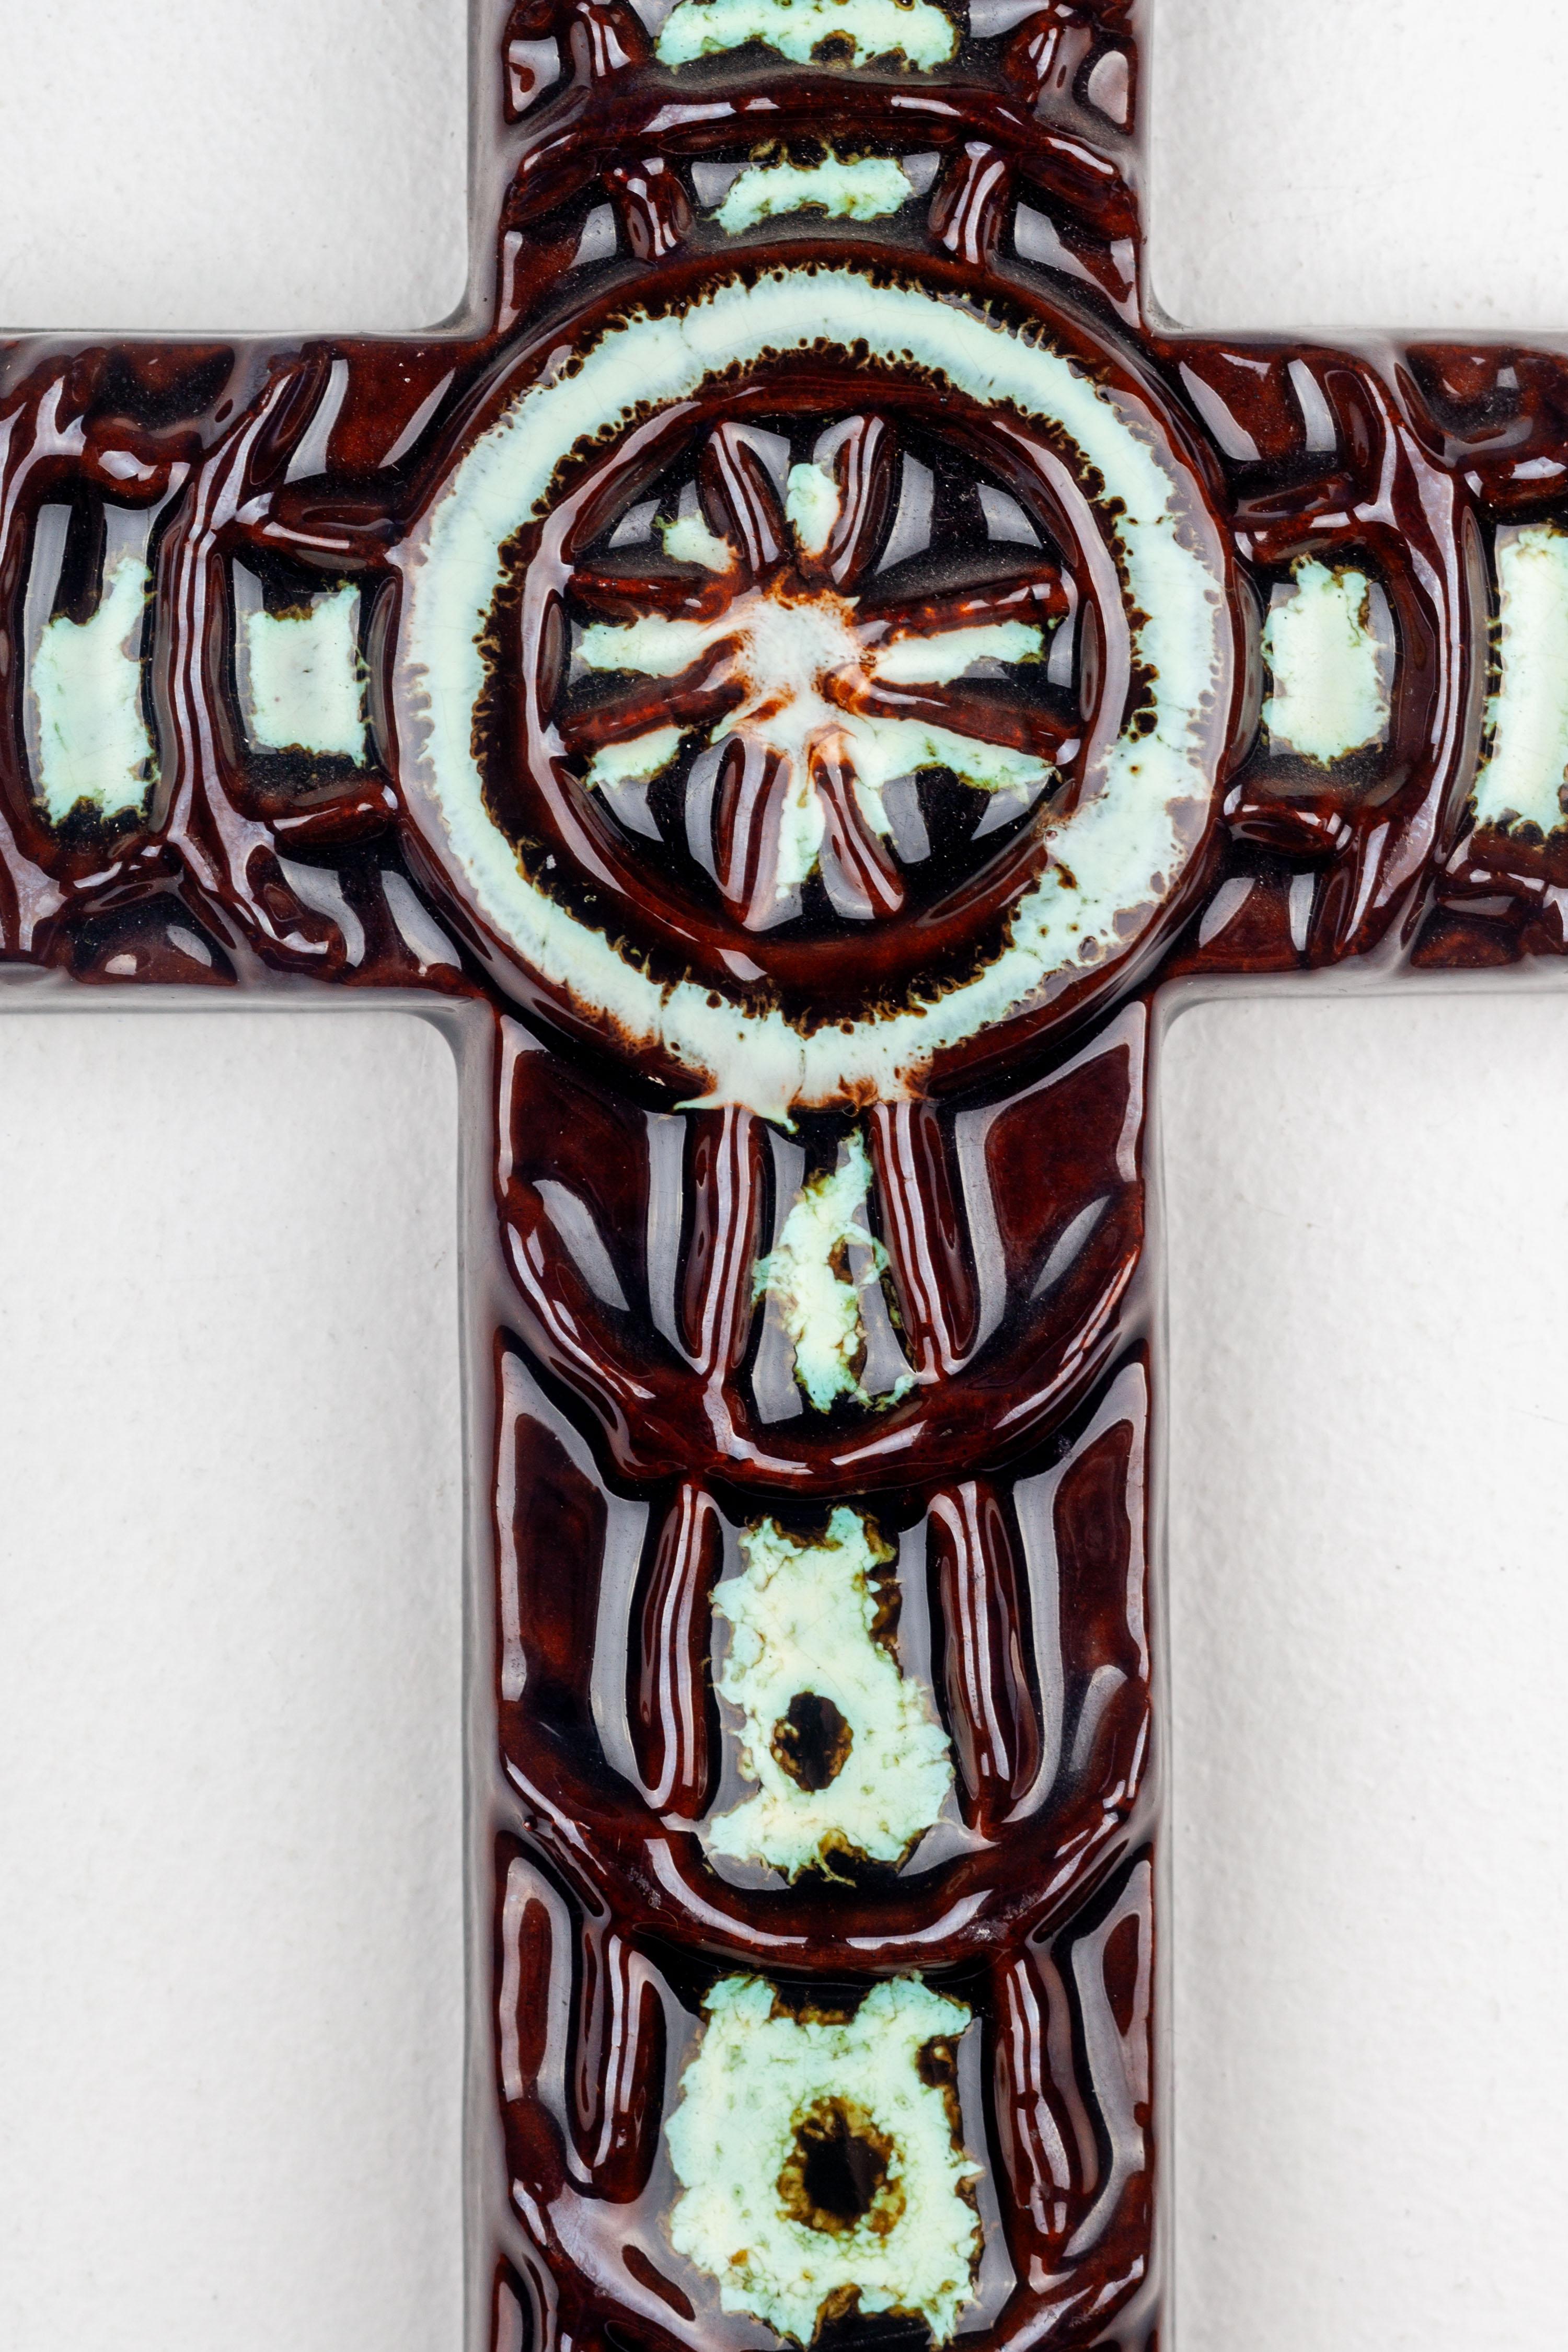 This distinctive mid-century modern ceramic wall cross represents a unique fusion of religious symbolism and the aesthetic principles of the mid-20th century European studio pottery movement. The piece is handcrafted, featuring an innovative design